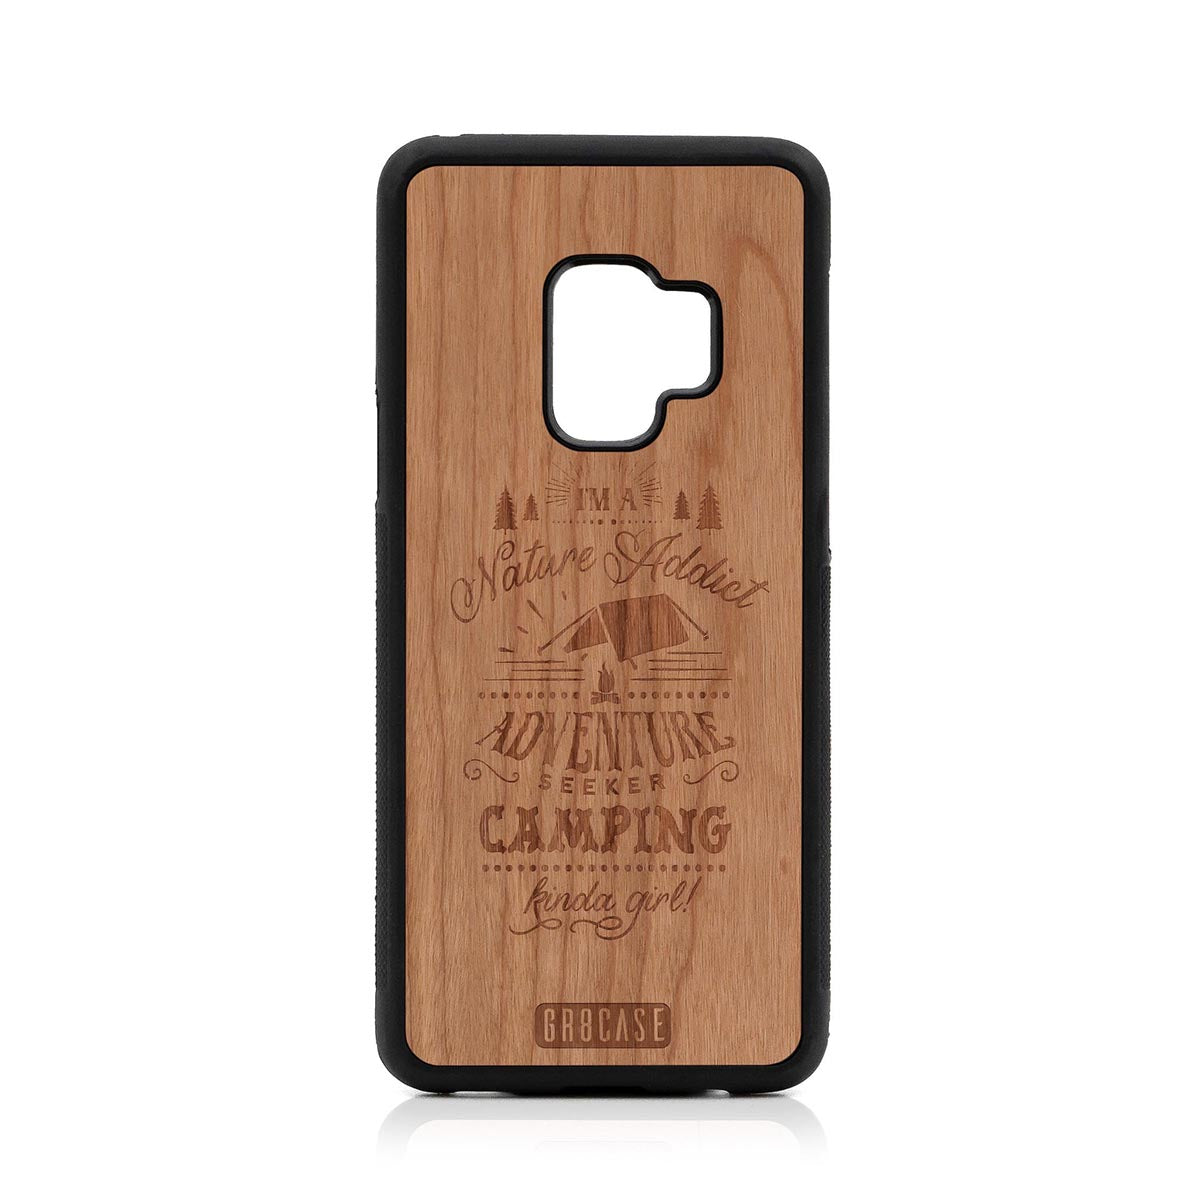 I'm A Nature Addict Adventure Seeker Camping Kinda Girl Design Wood Case Samsung Galaxy S9 by GR8CASE